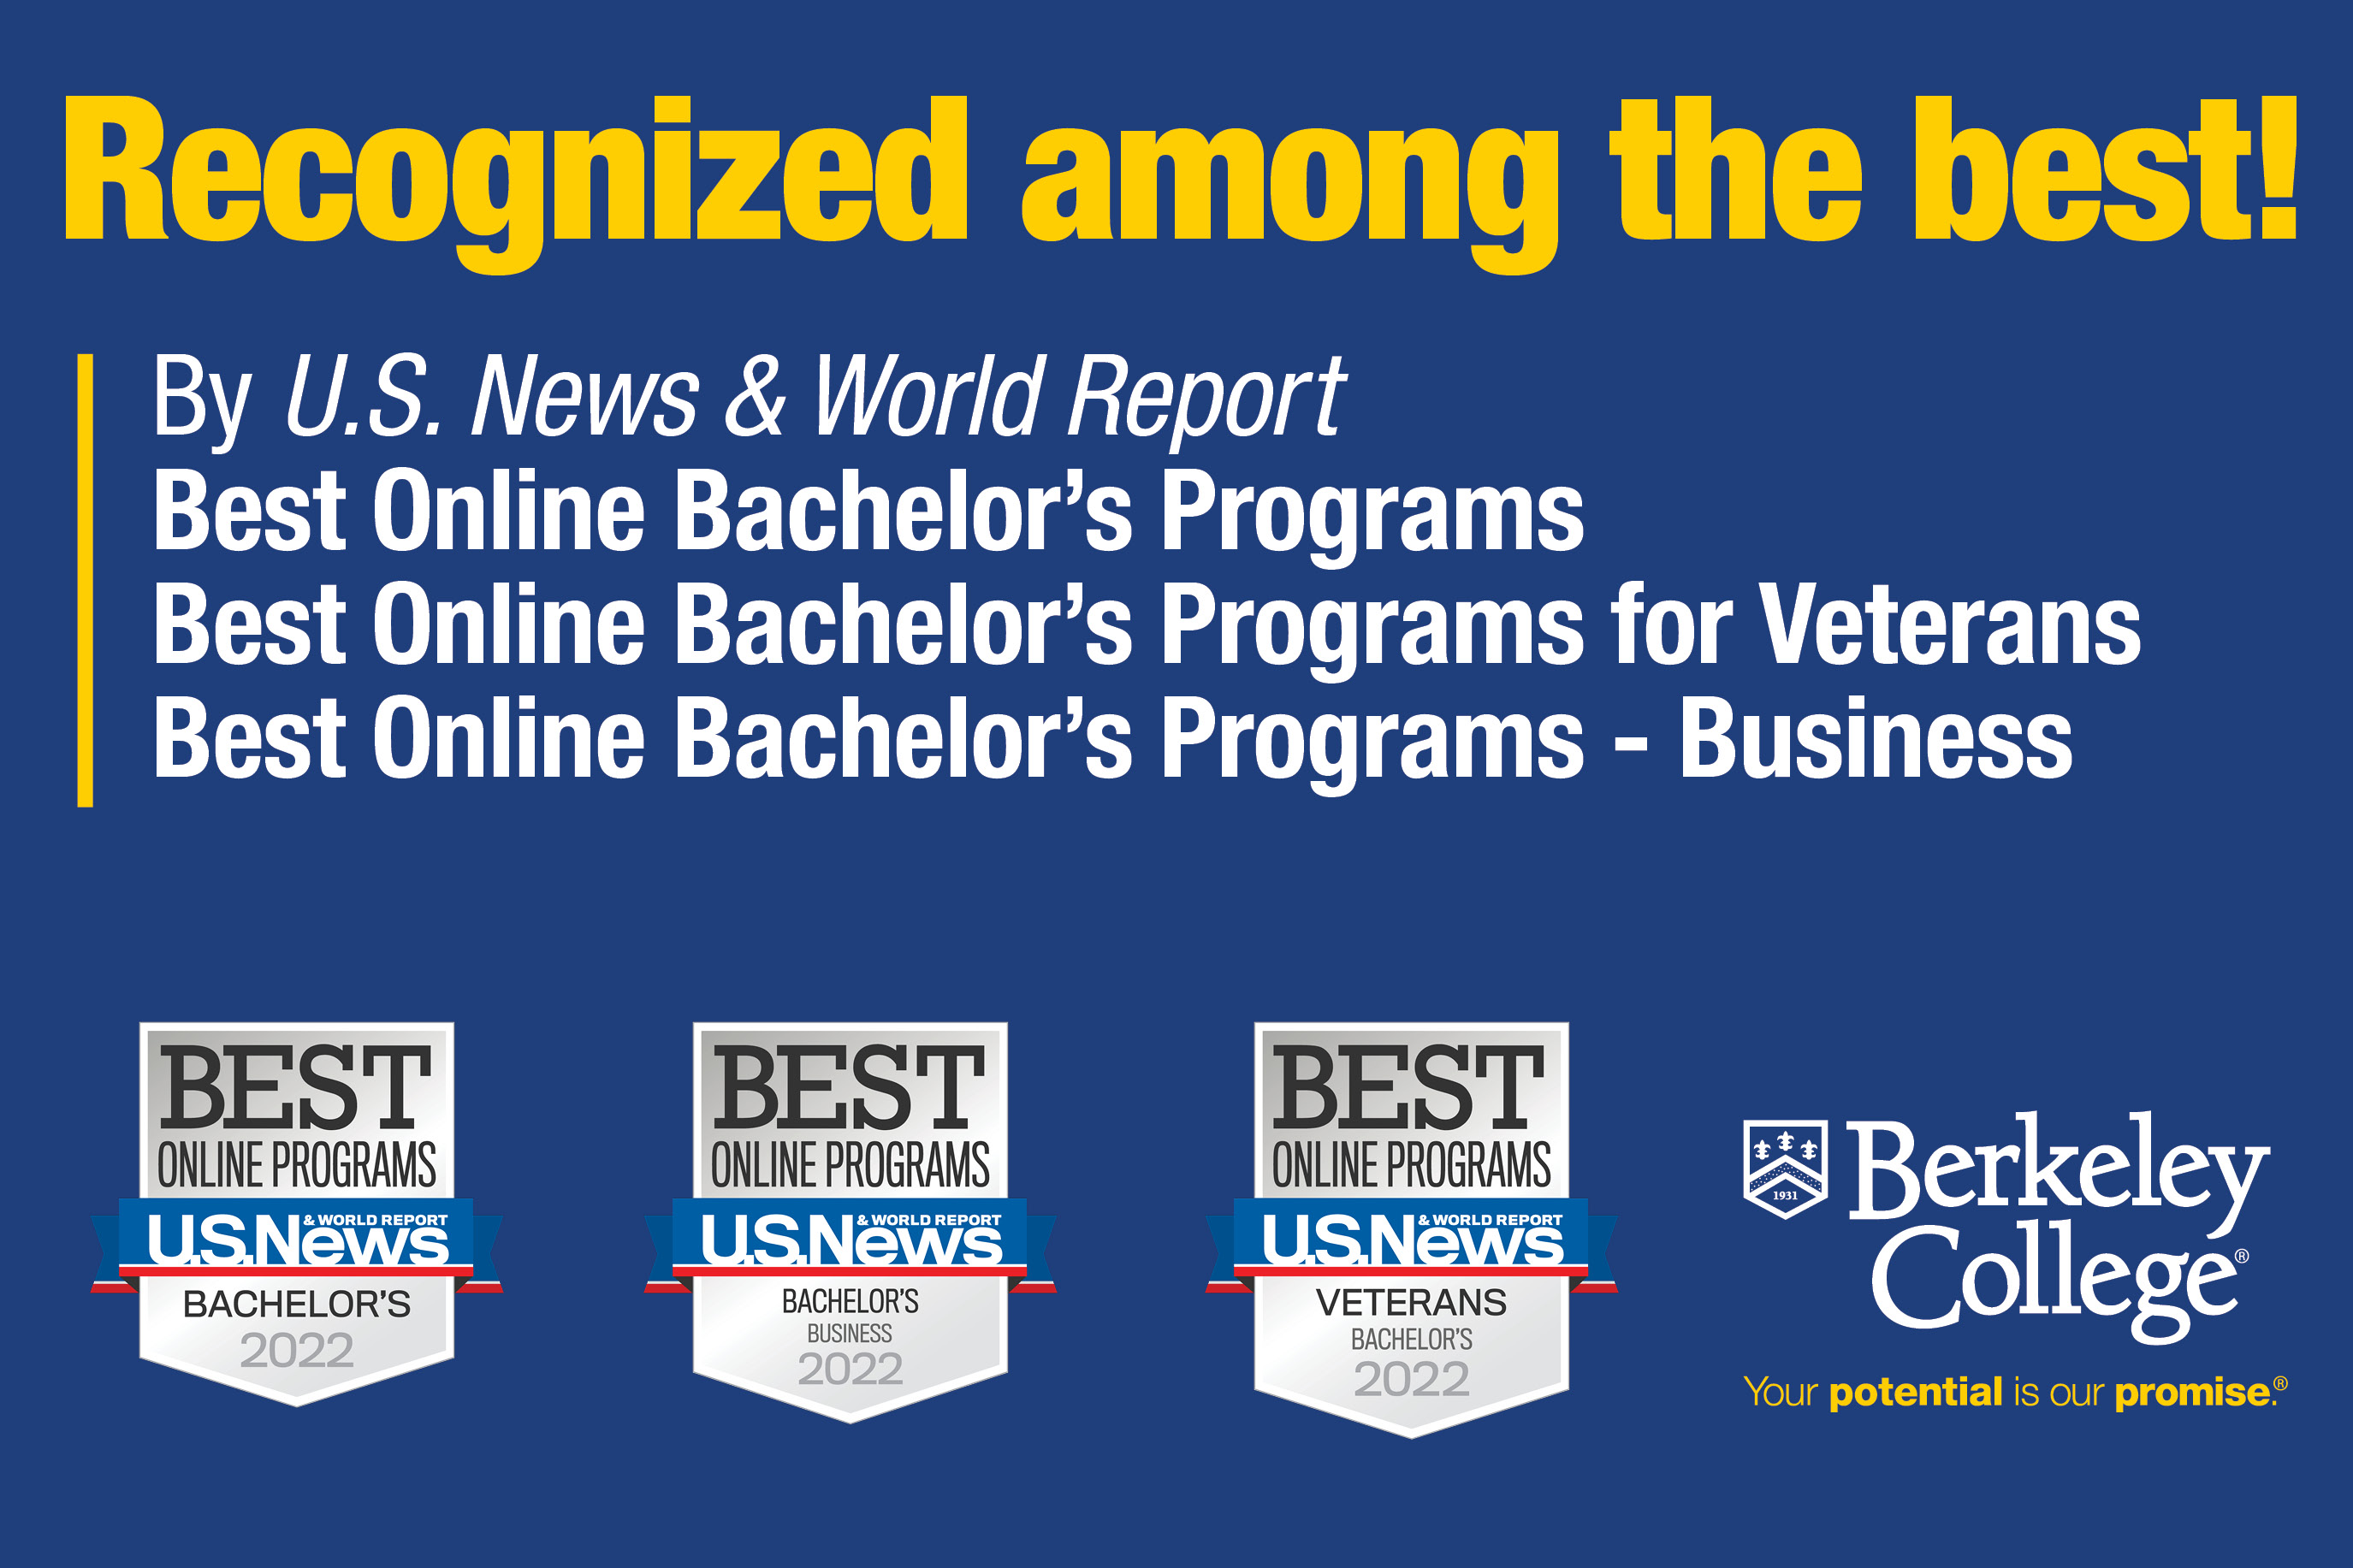 U.S. News & World Report Ranks Berkeley College among Best Online Bachelor's Degree Programs for 9th Consecutive Year